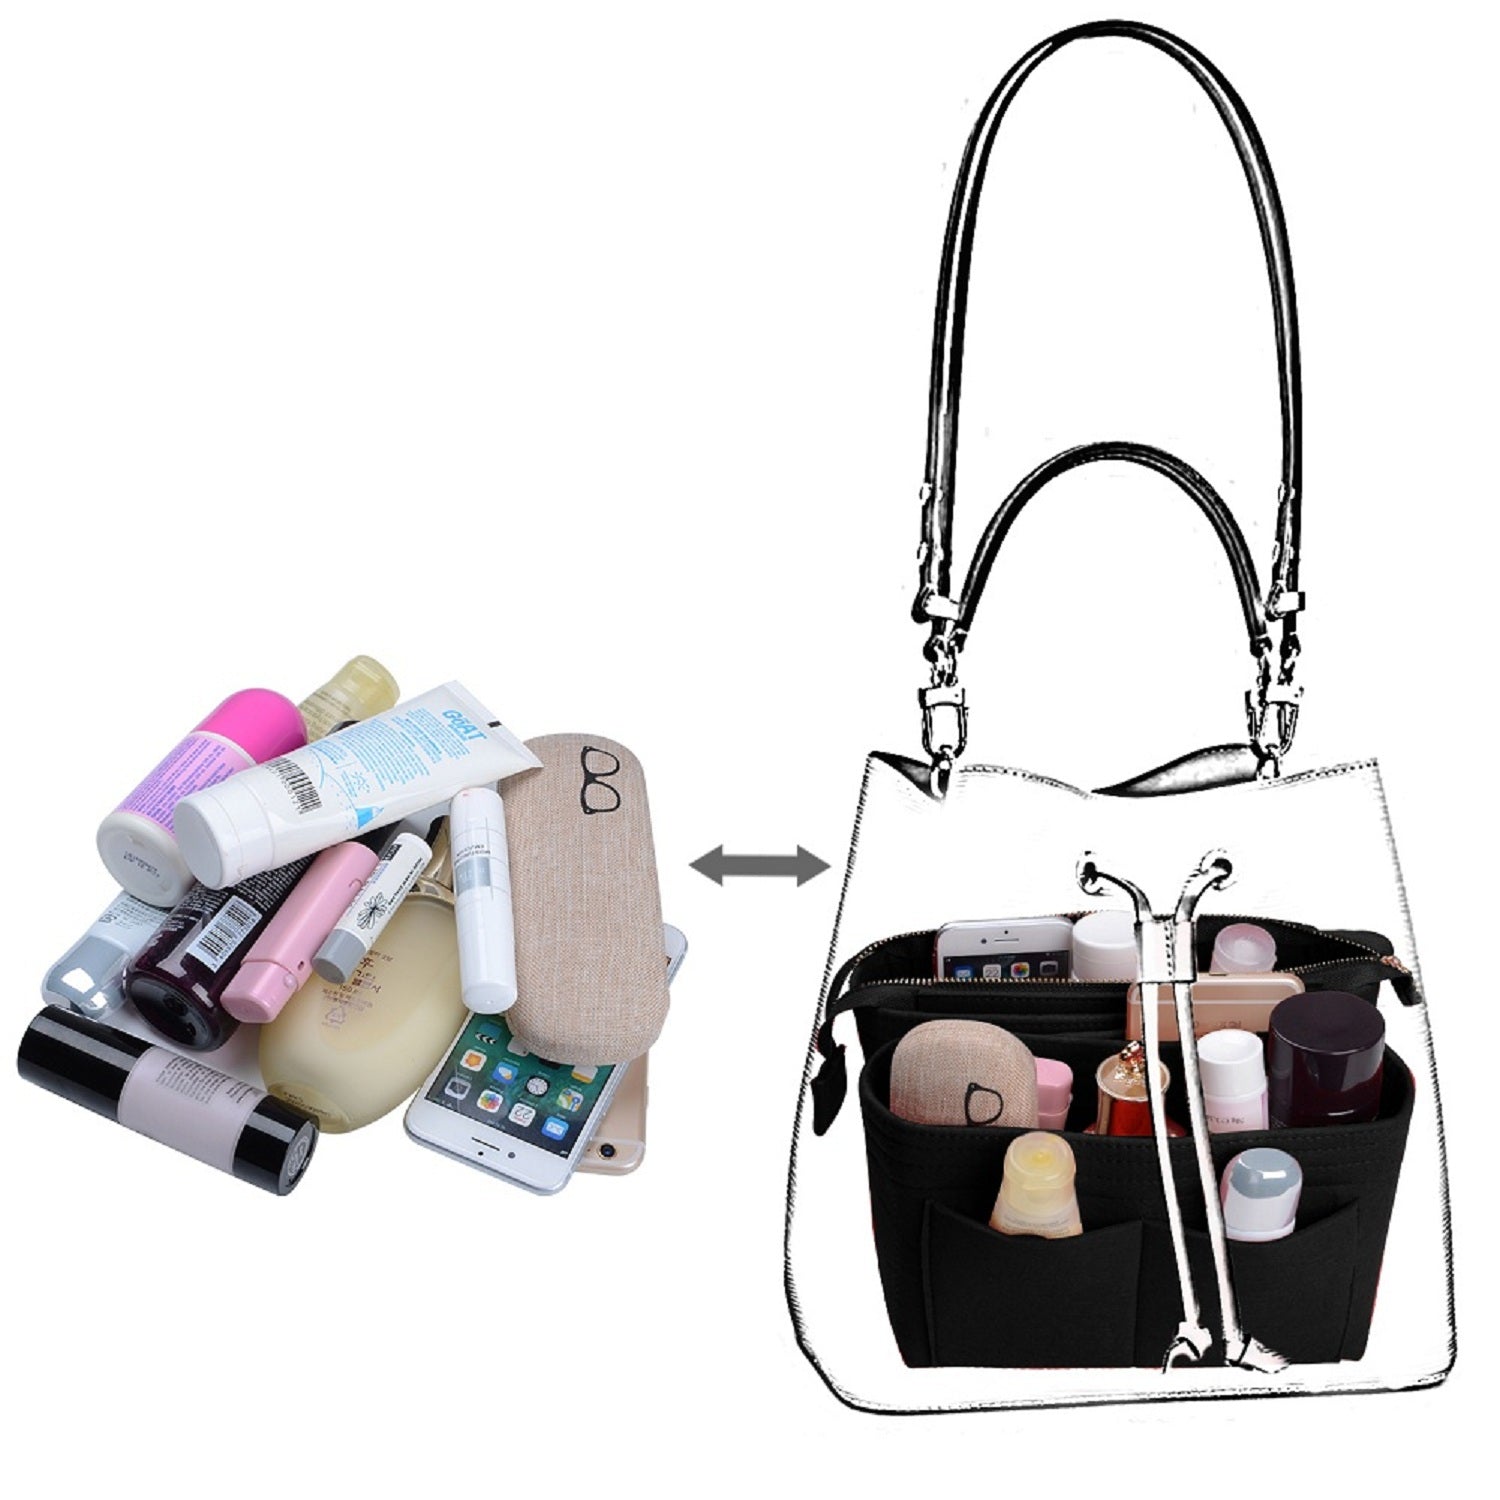 Purse Organizer, Bag in Bag Organizer With 2 Packs In One Set For LV N ...